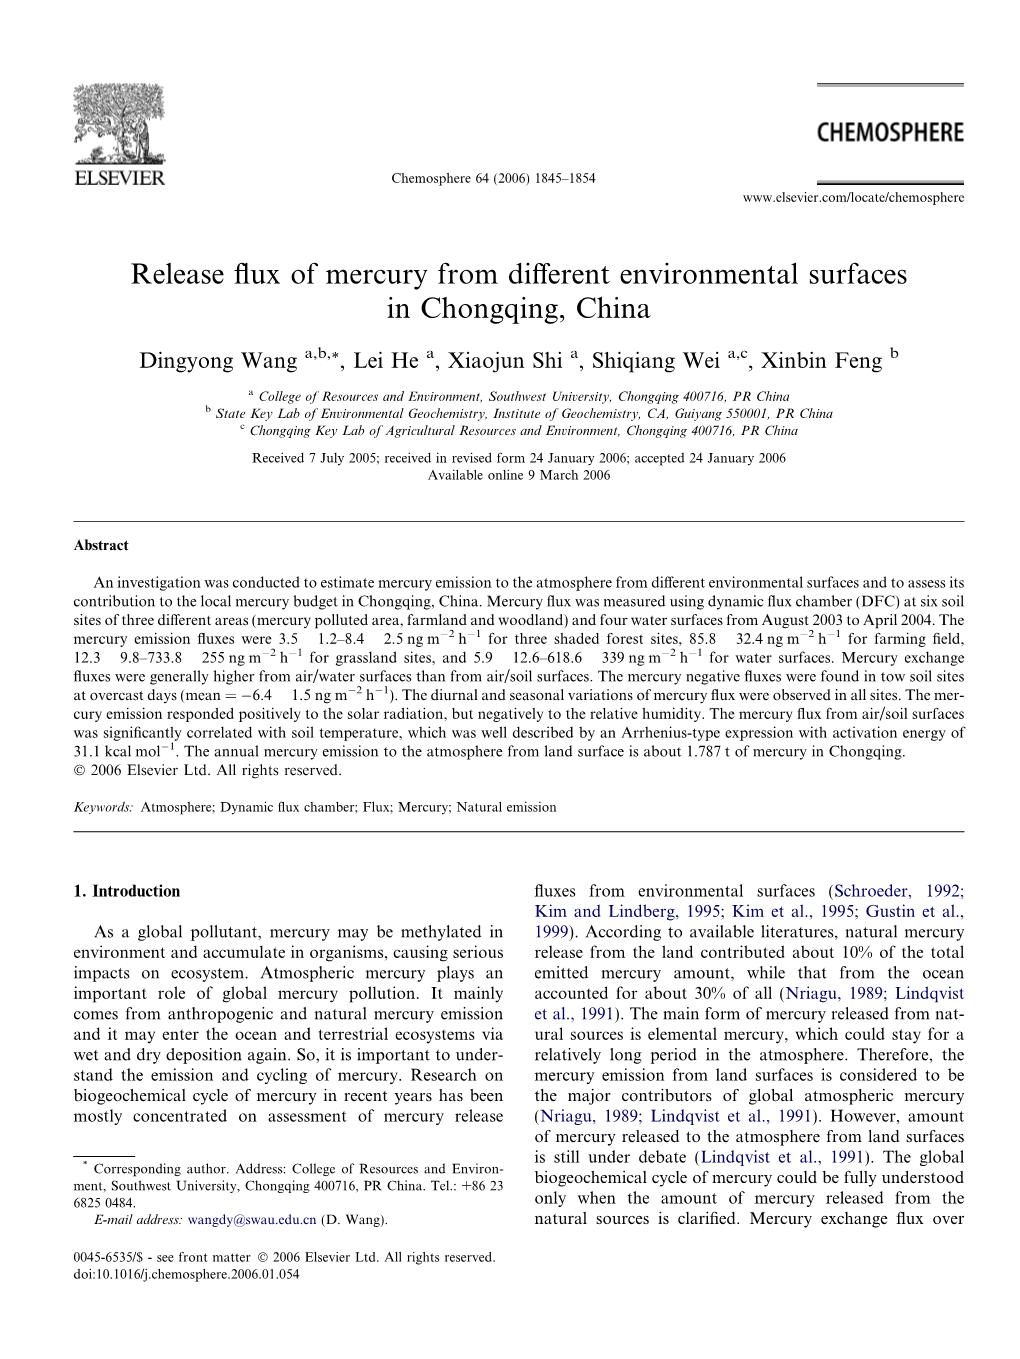 Release Flux of Mercury from Different Environmental Surfaces In